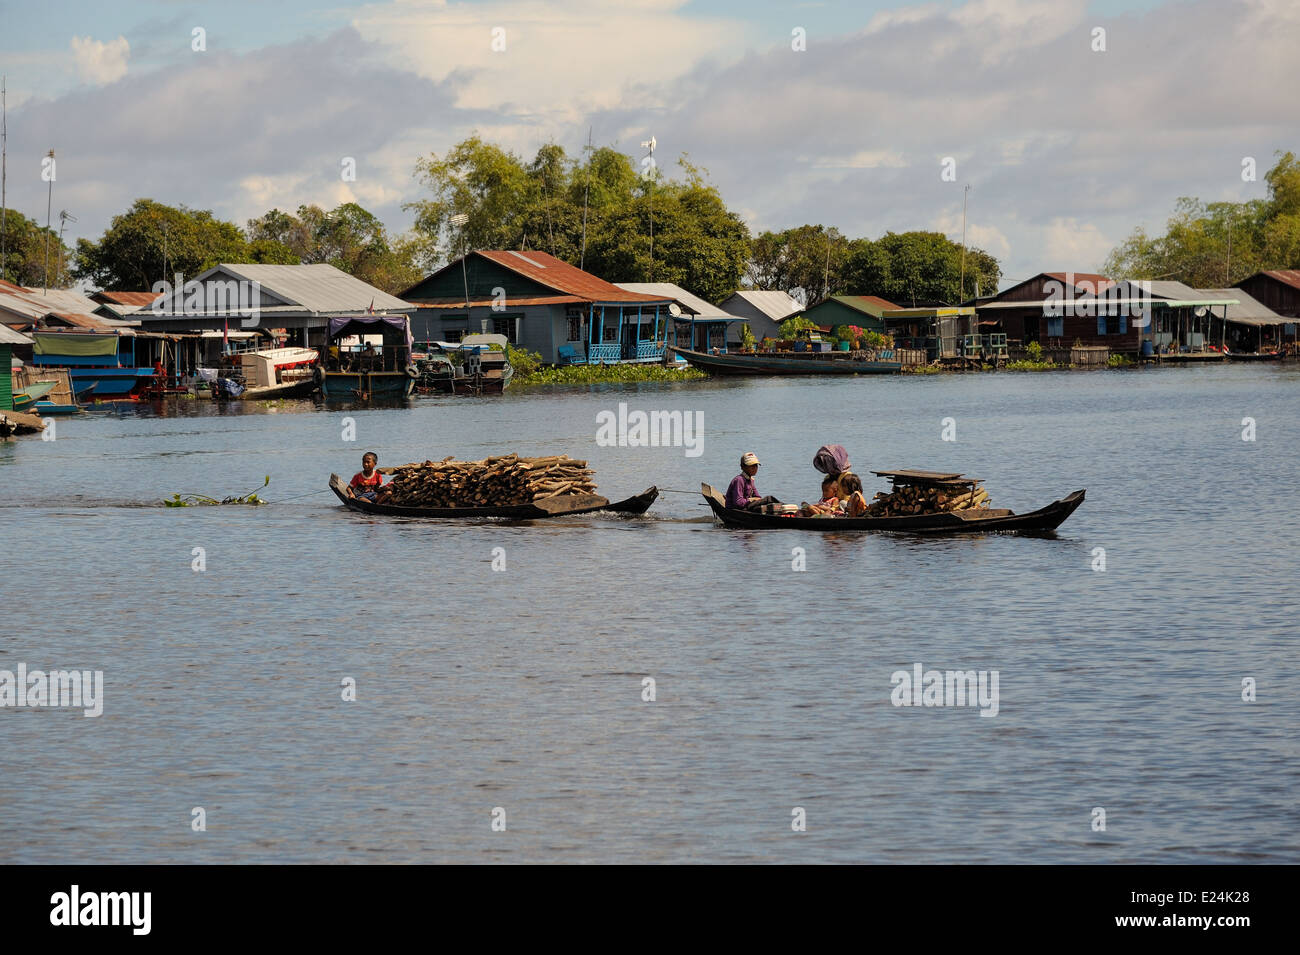 Family transporting firewood by small boat on the tonle sap lake Stock Photo